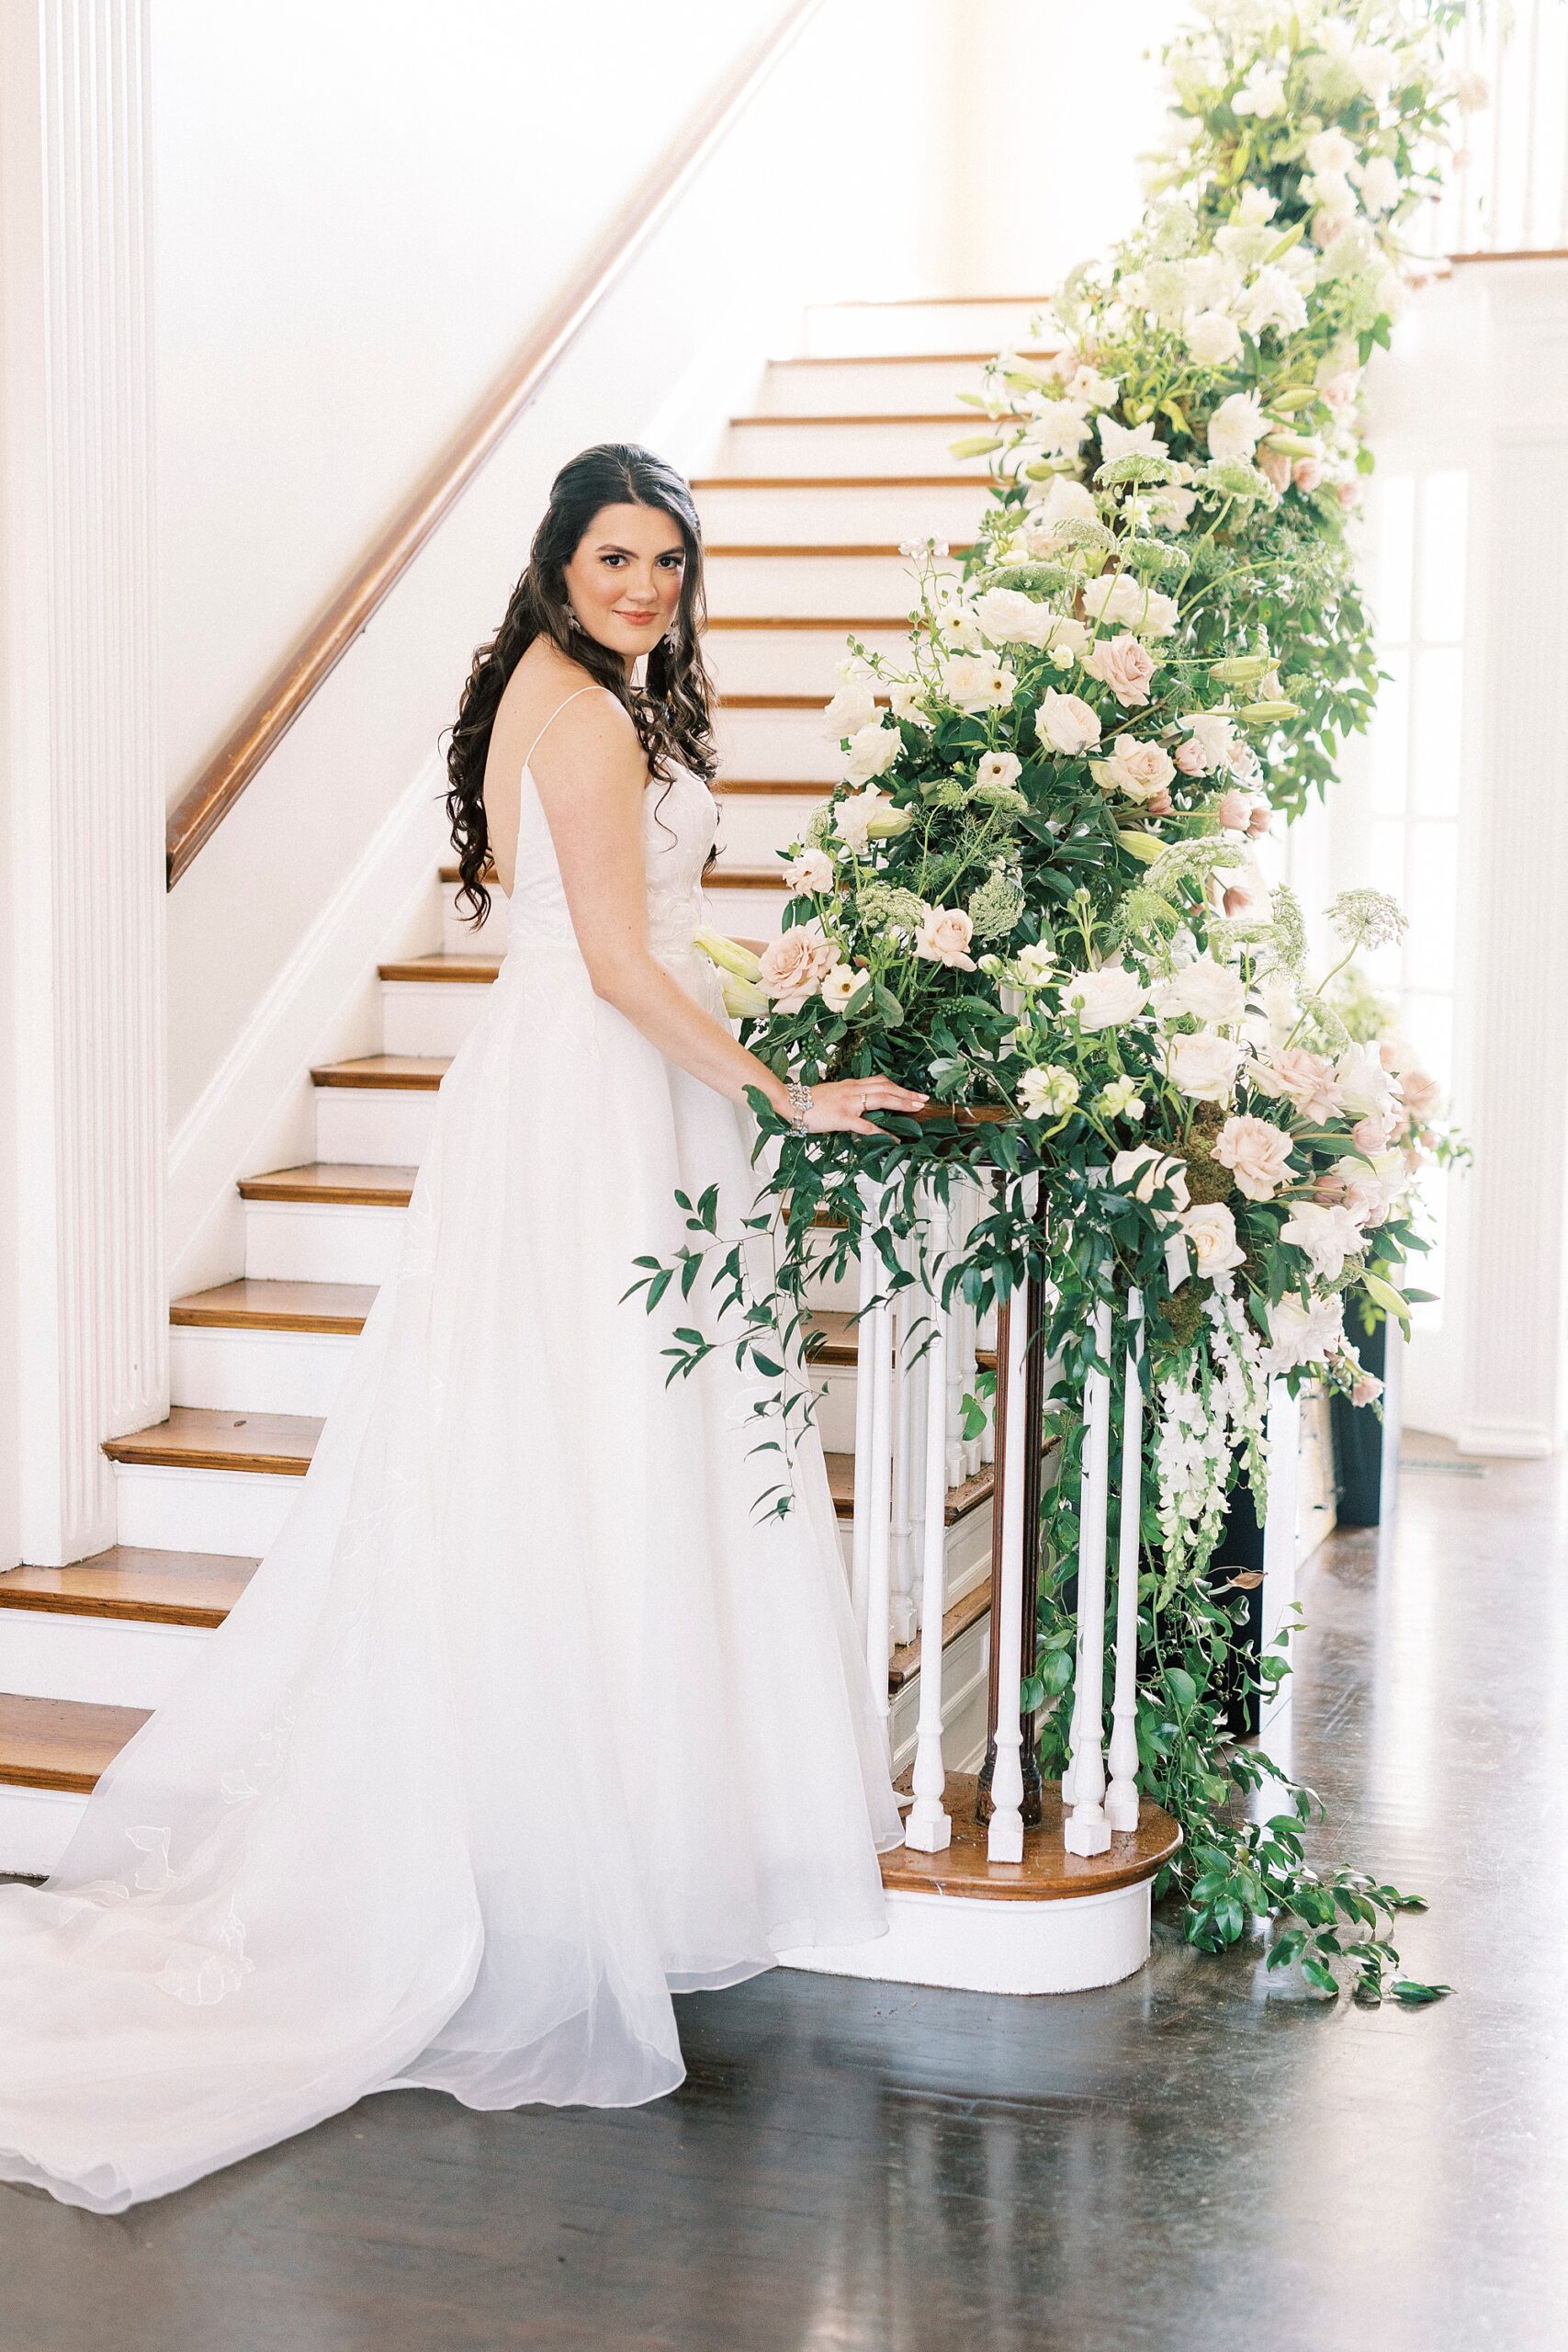 bride stands on staircase with greenery and roses on banister 